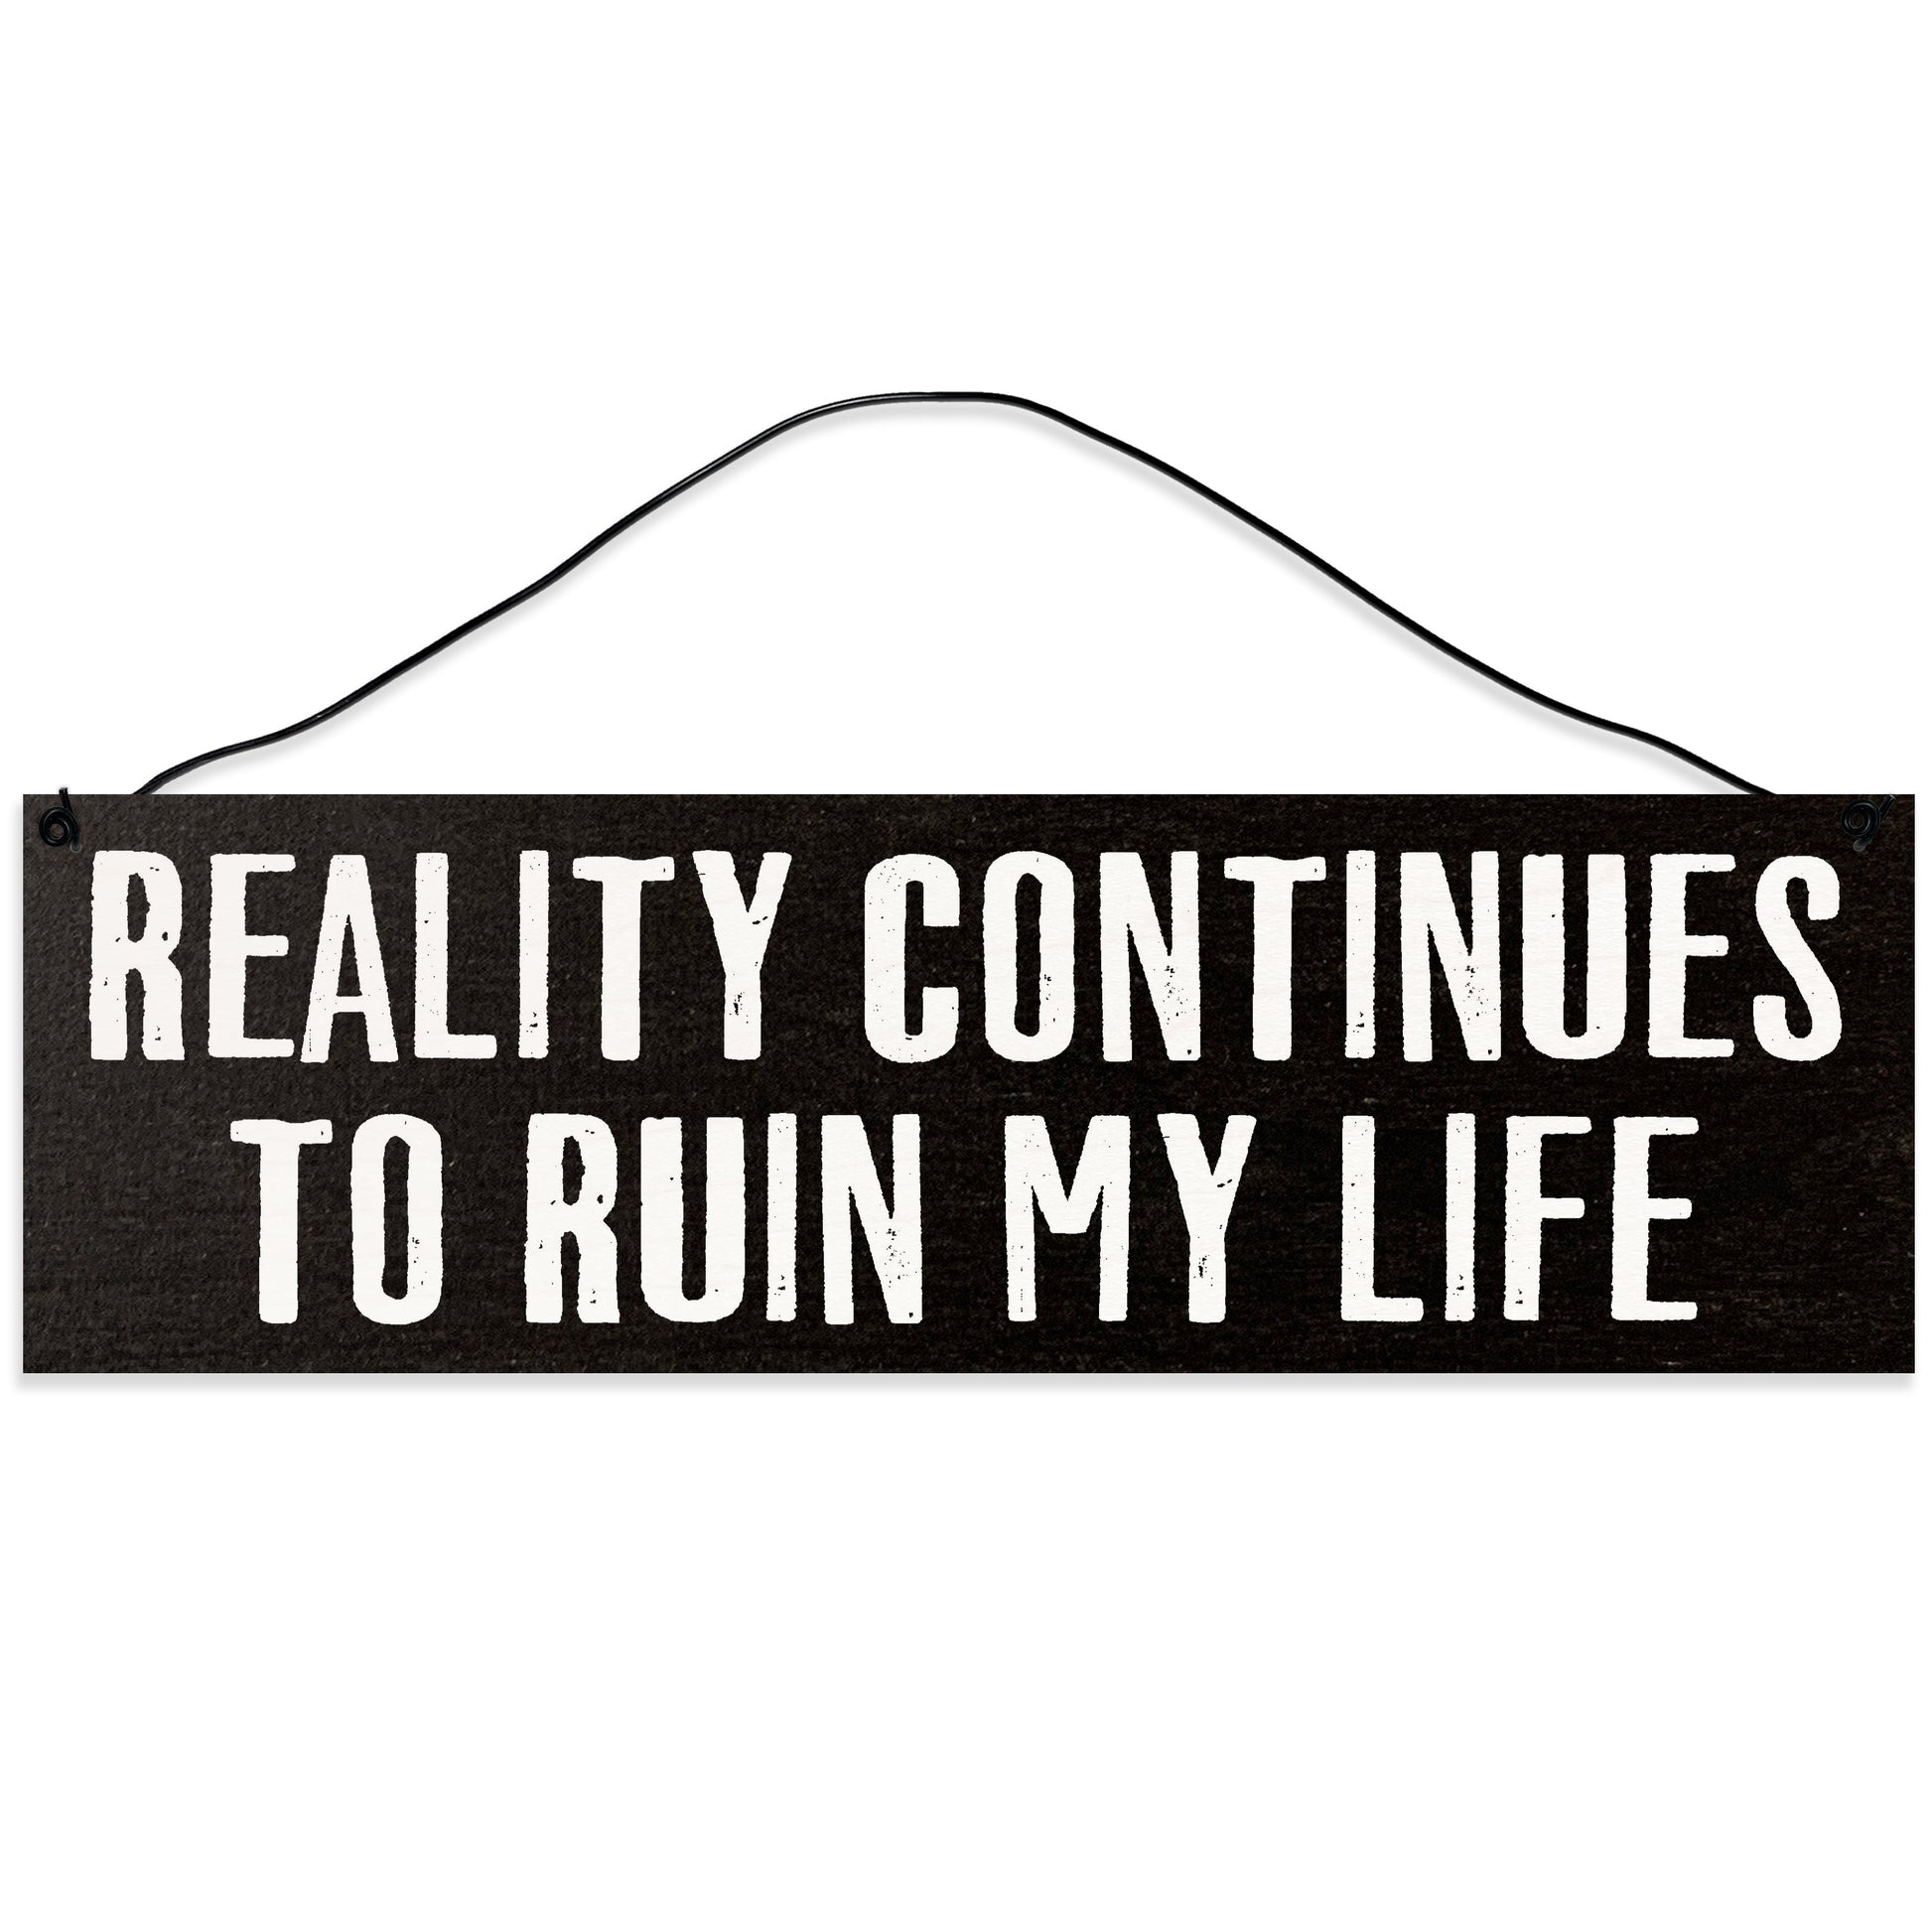 Sawyer's Mill - Reality Continues to Ruin My Life. Wood Sign for Home or Office. Measures 3x10 inches.